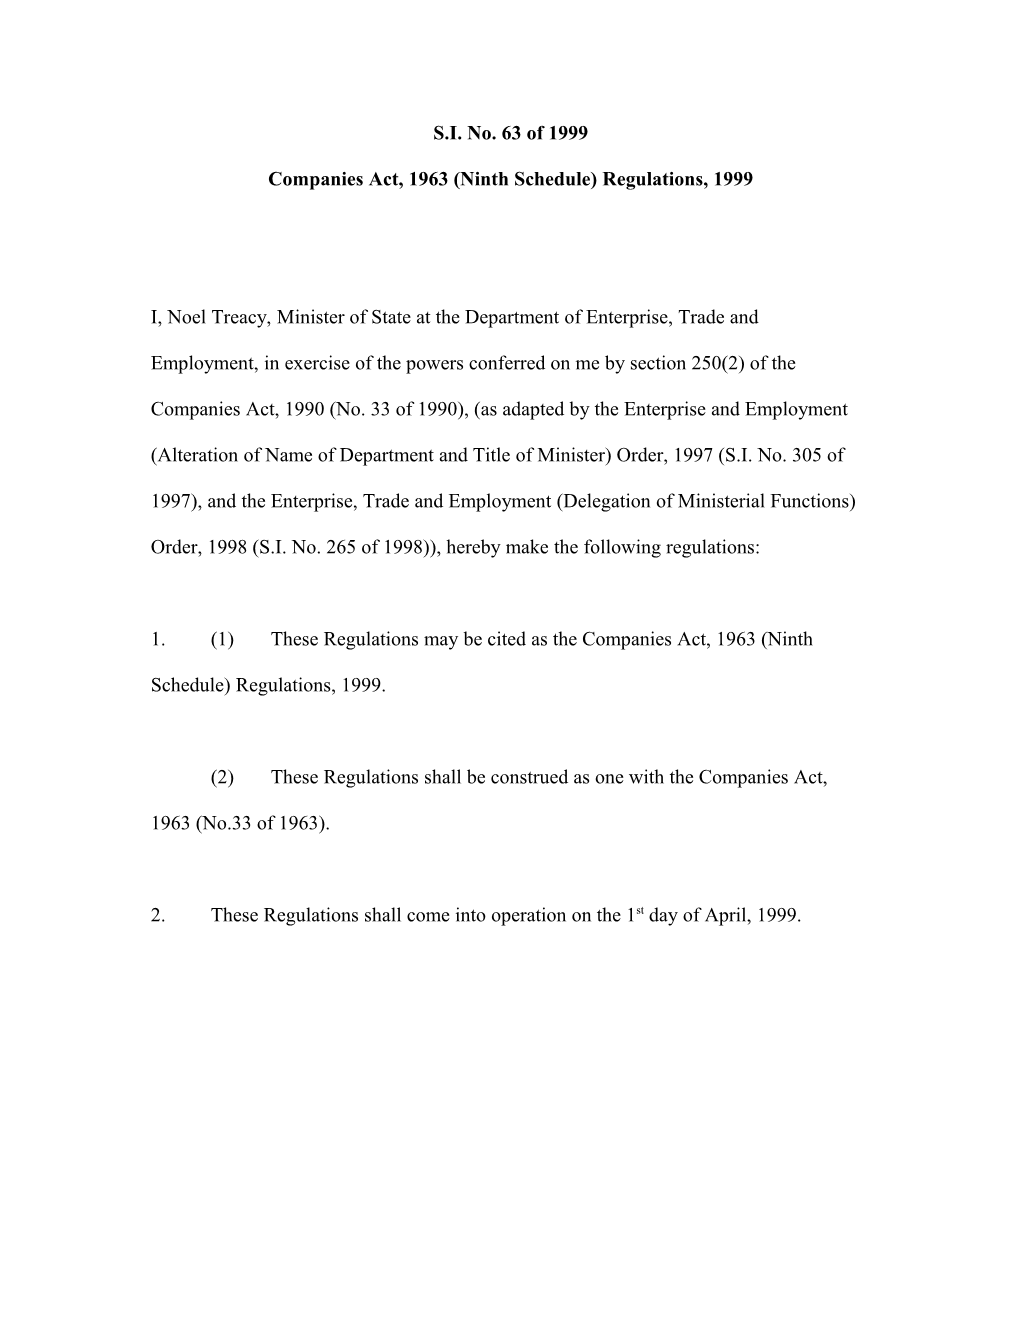 Companies Act, 1963 (Ninth Schedule) Regulations, 1999